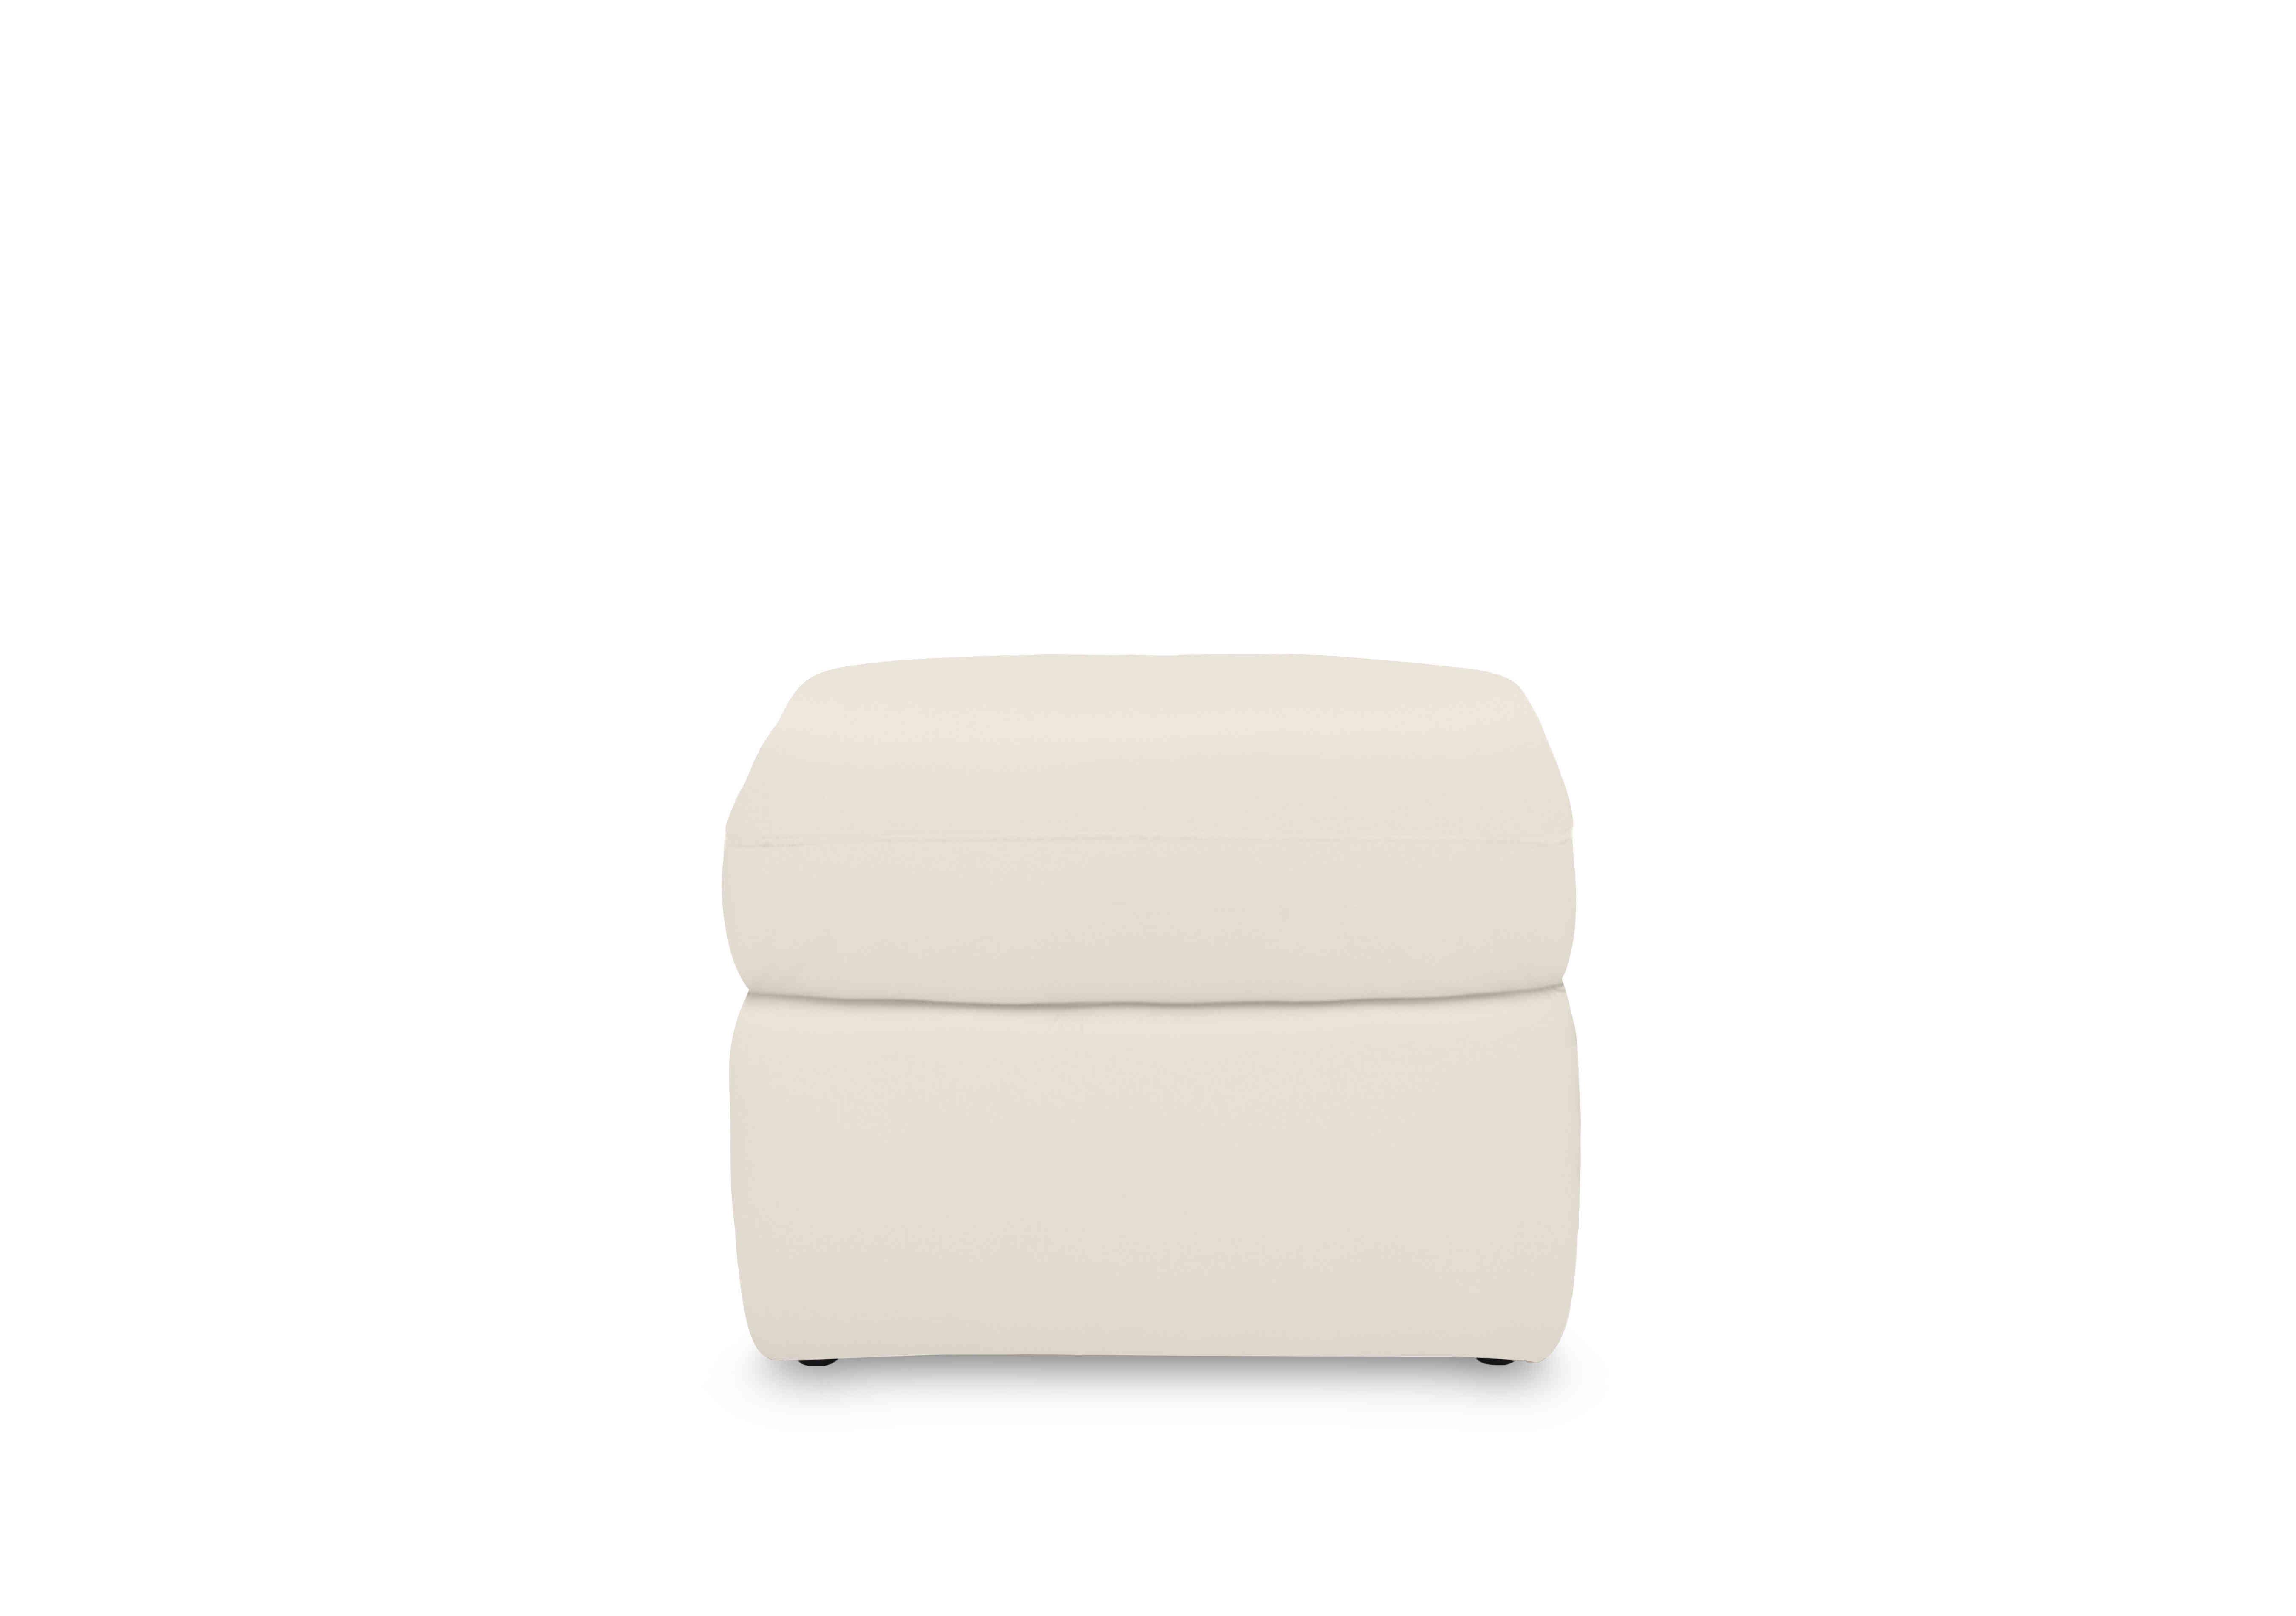 Cinemax Leather Storage Footstool in Le-9307 White on Furniture Village